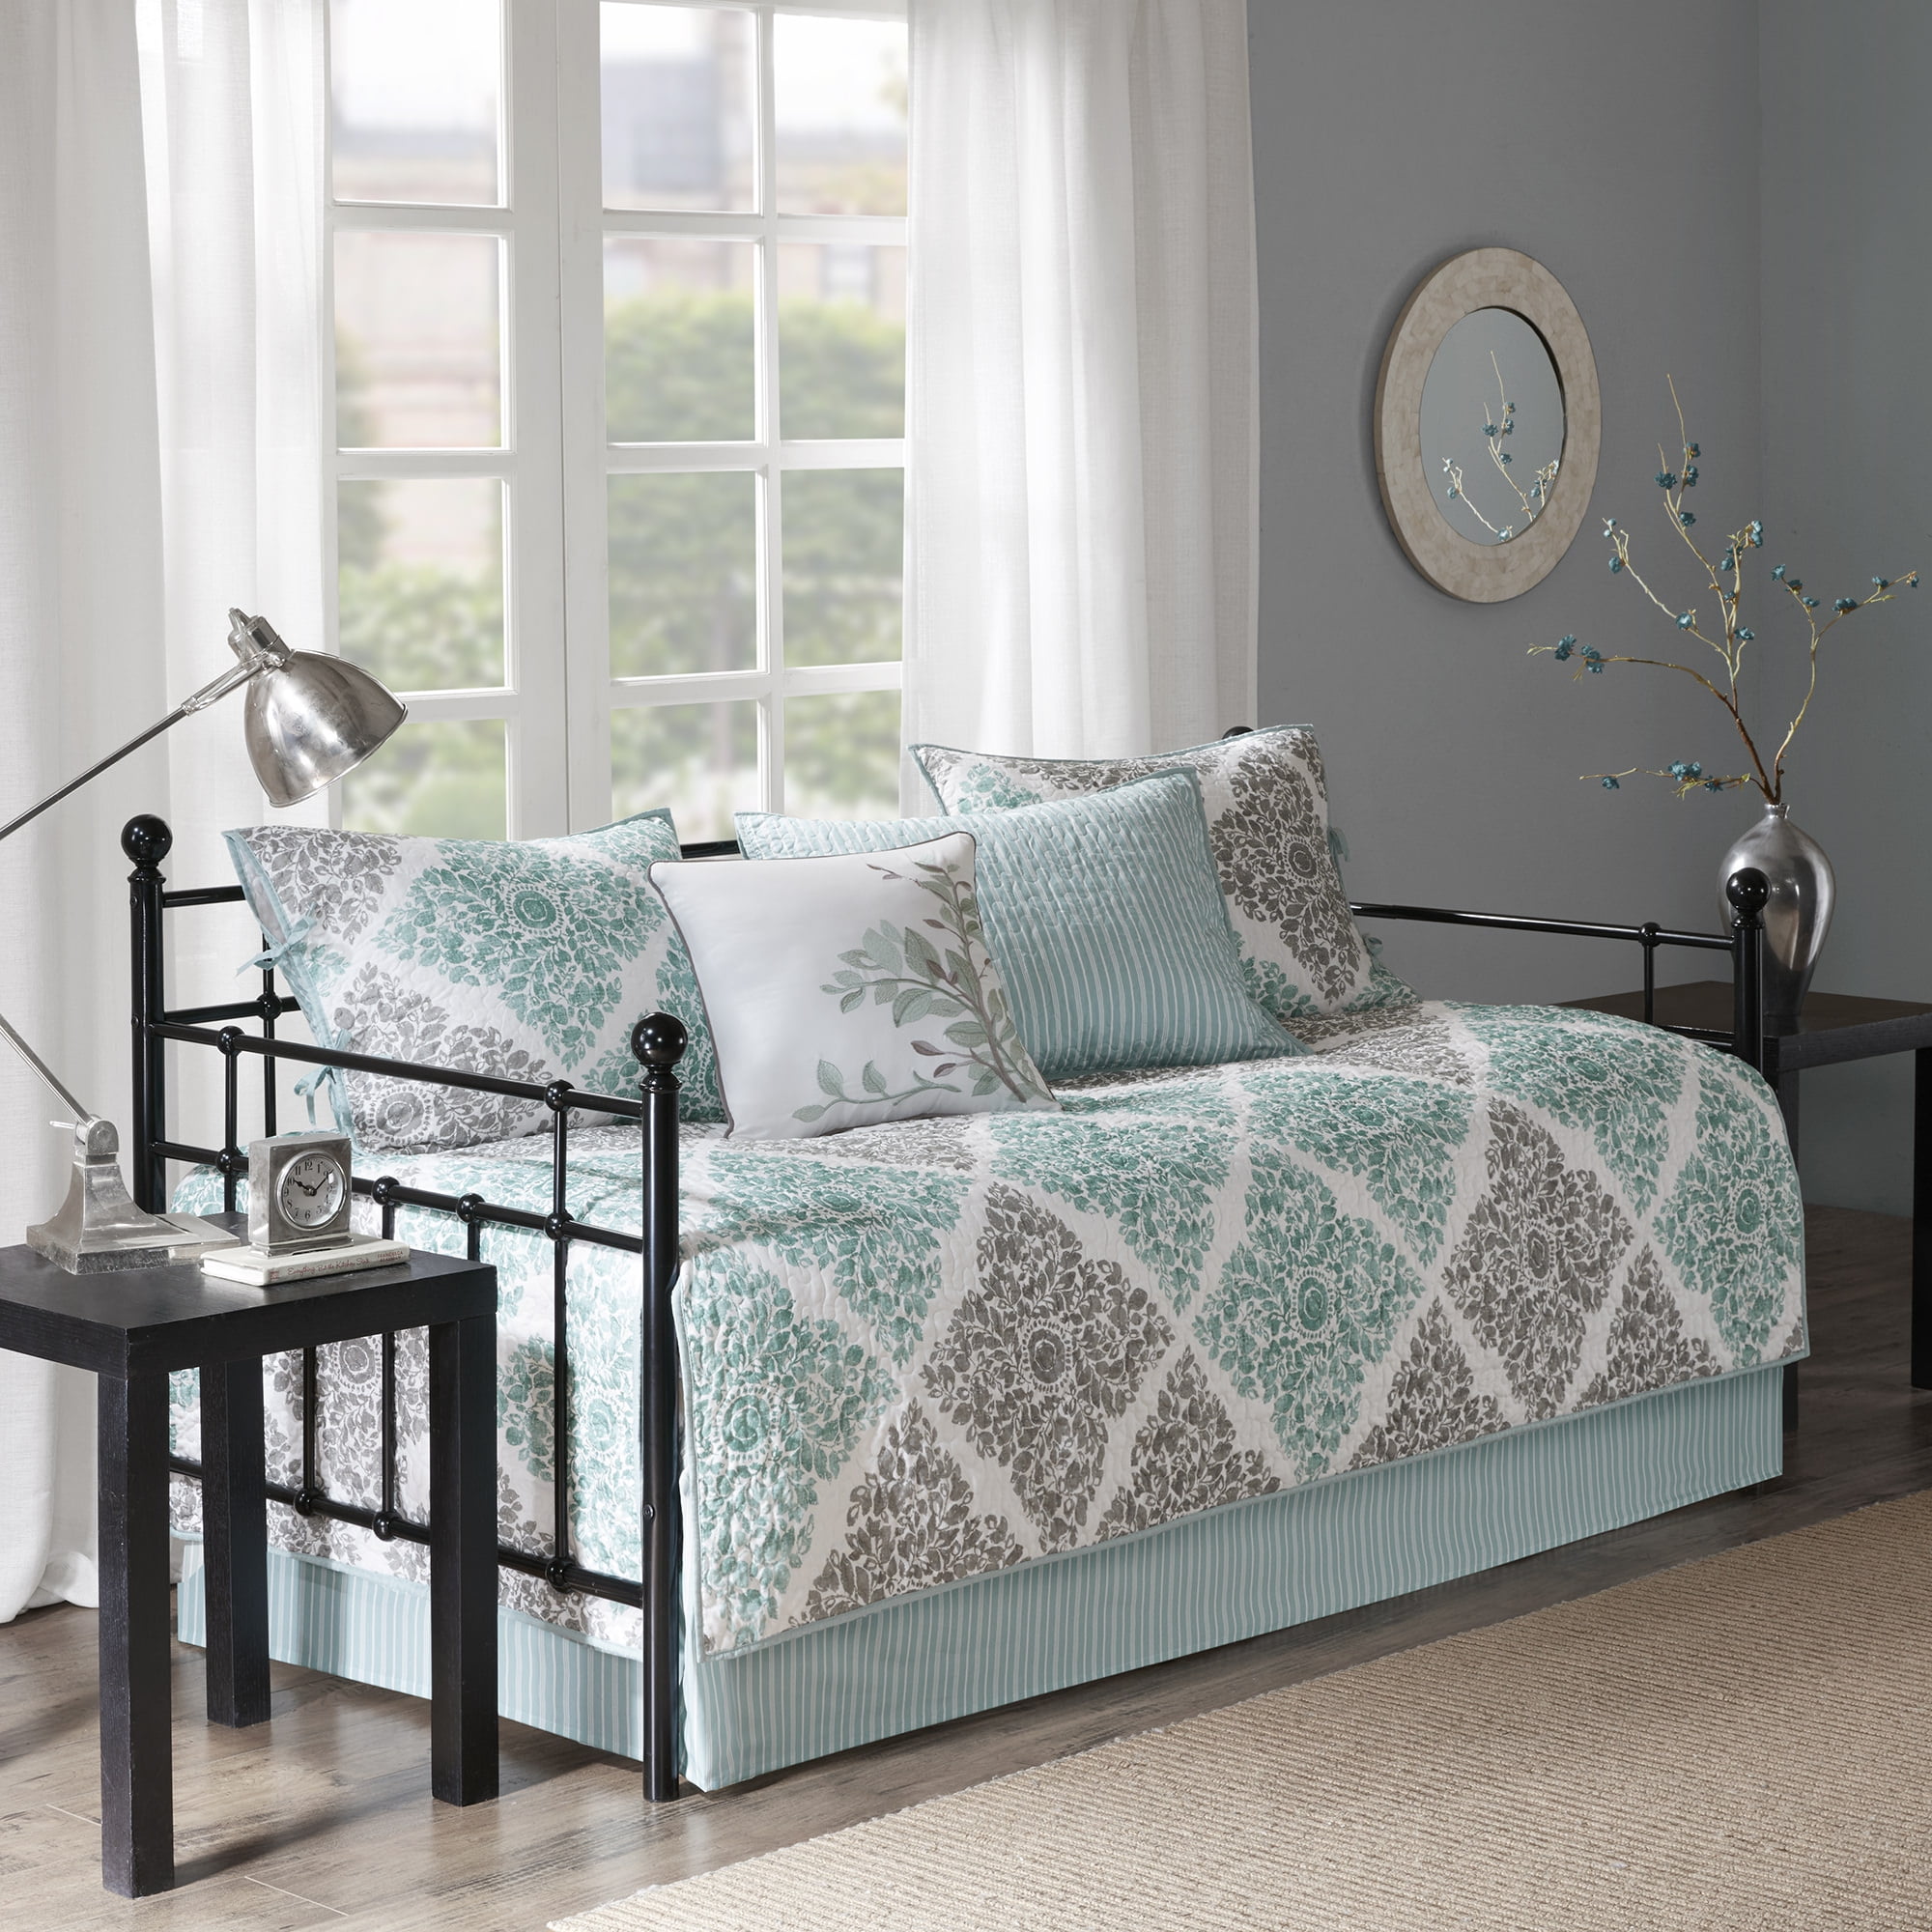 daybed bedding for girl